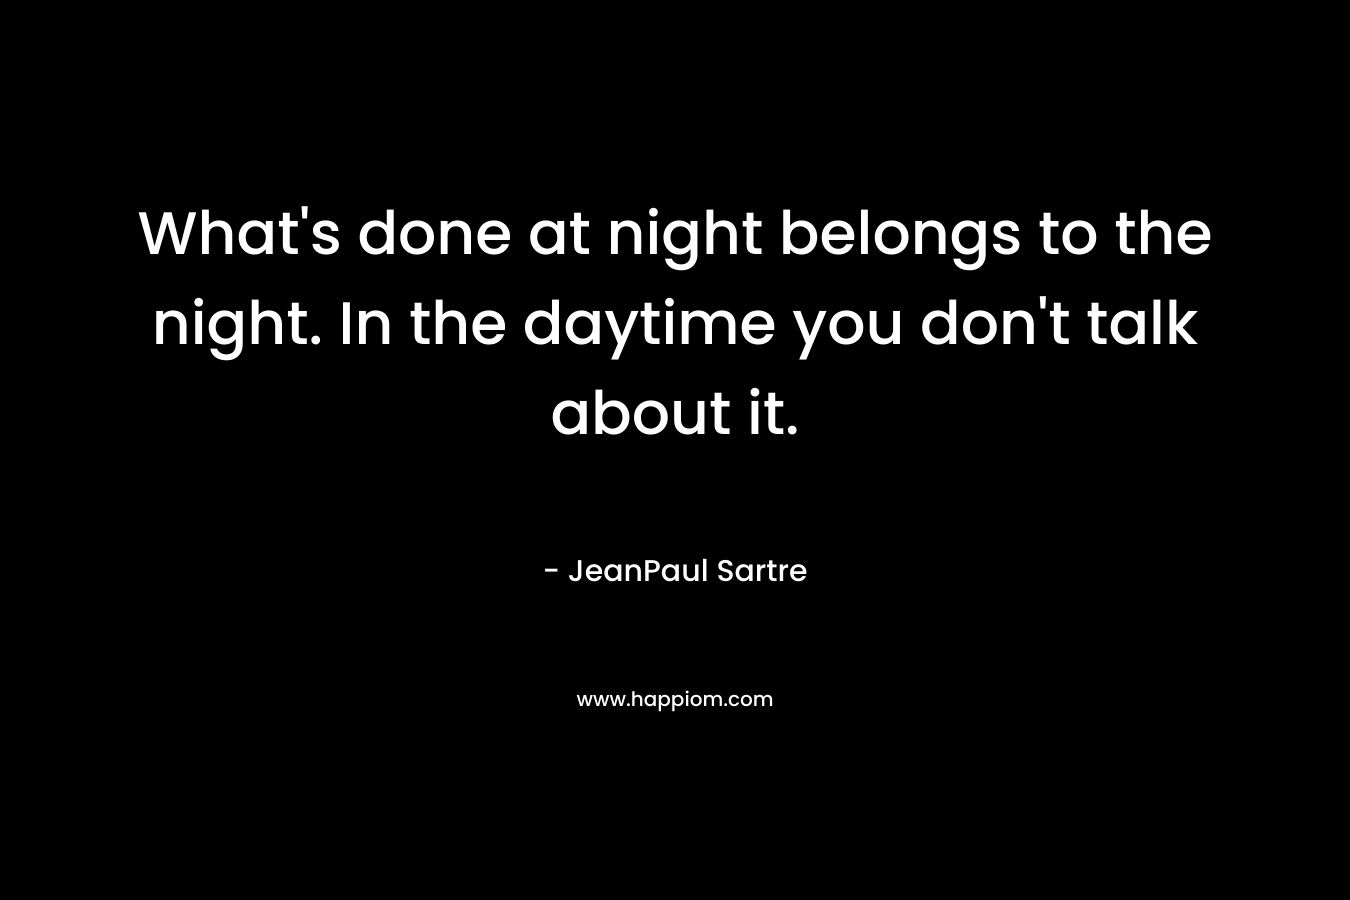 What's done at night belongs to the night. In the daytime you don't talk about it.